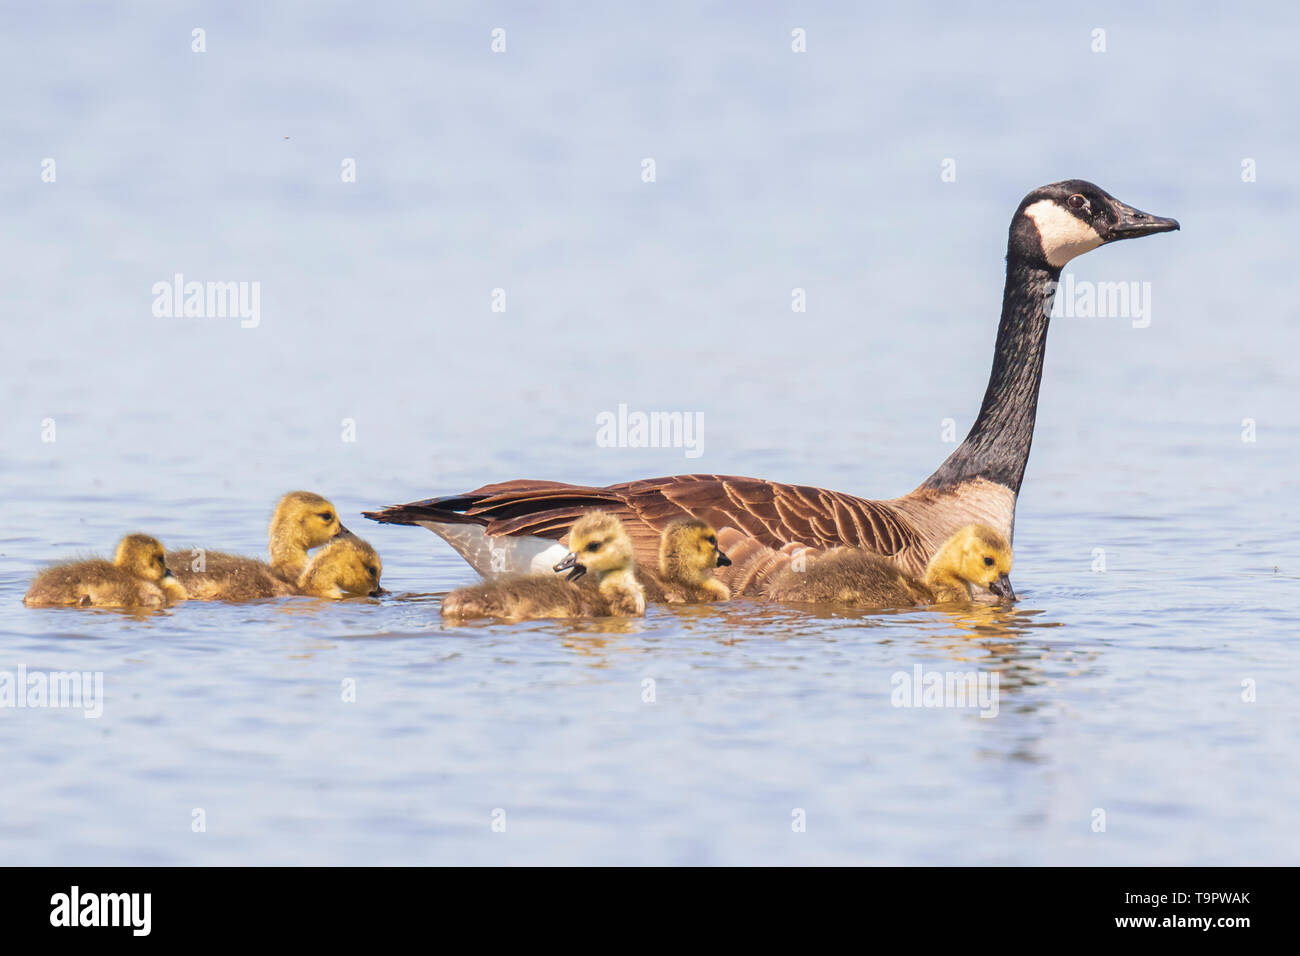 Close-up of a Canada goose (Branta canadensis) with chicks swimming in a pond. Stock Photo